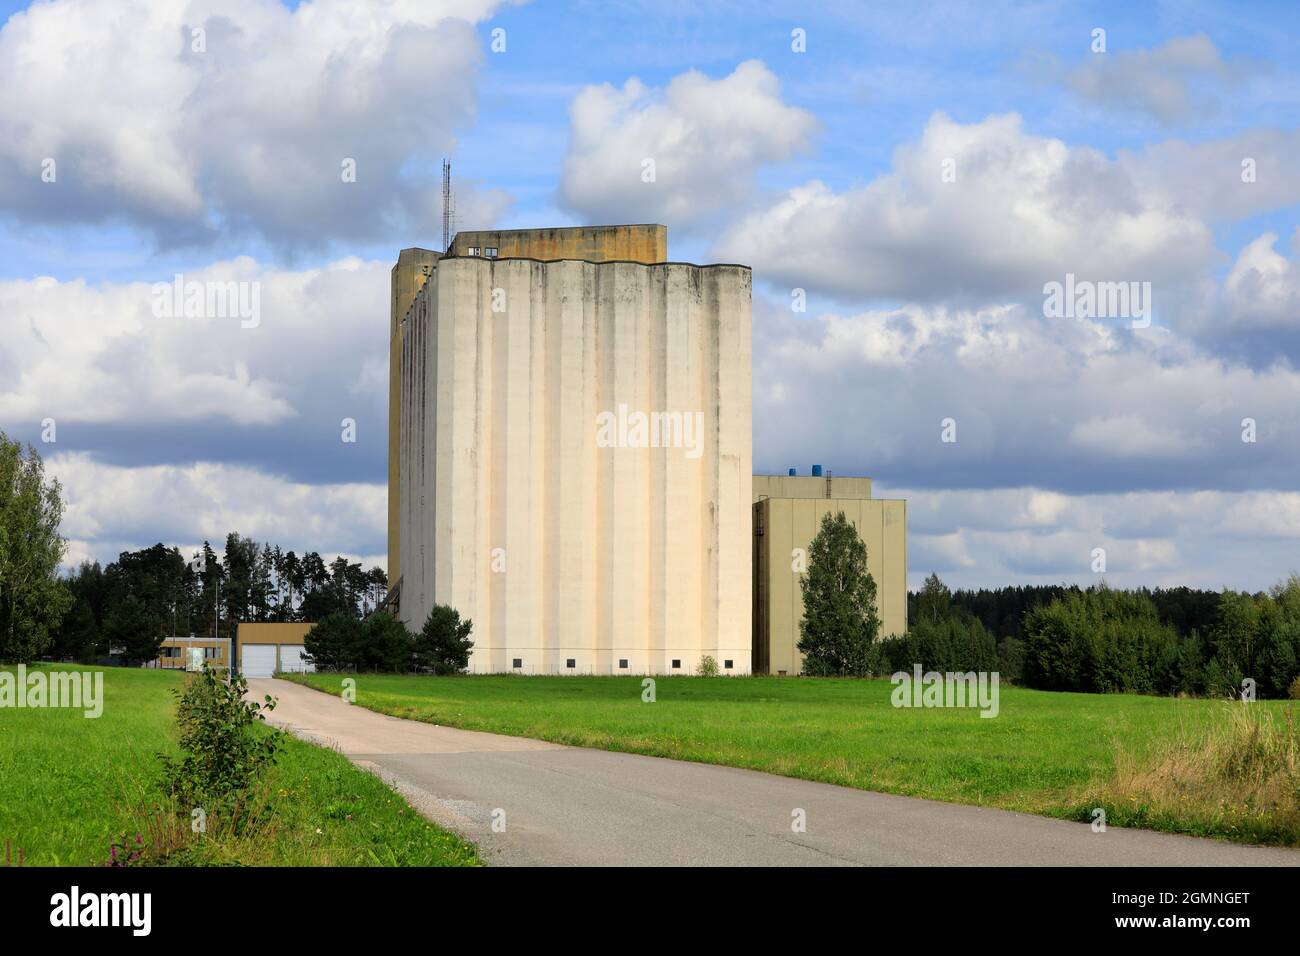 Asphalt road leads to Pernio Granary, grain elevator of Suomen Viljava Oy. This beautiful landmark in Salo is owned by State of Finland. Stock Photo